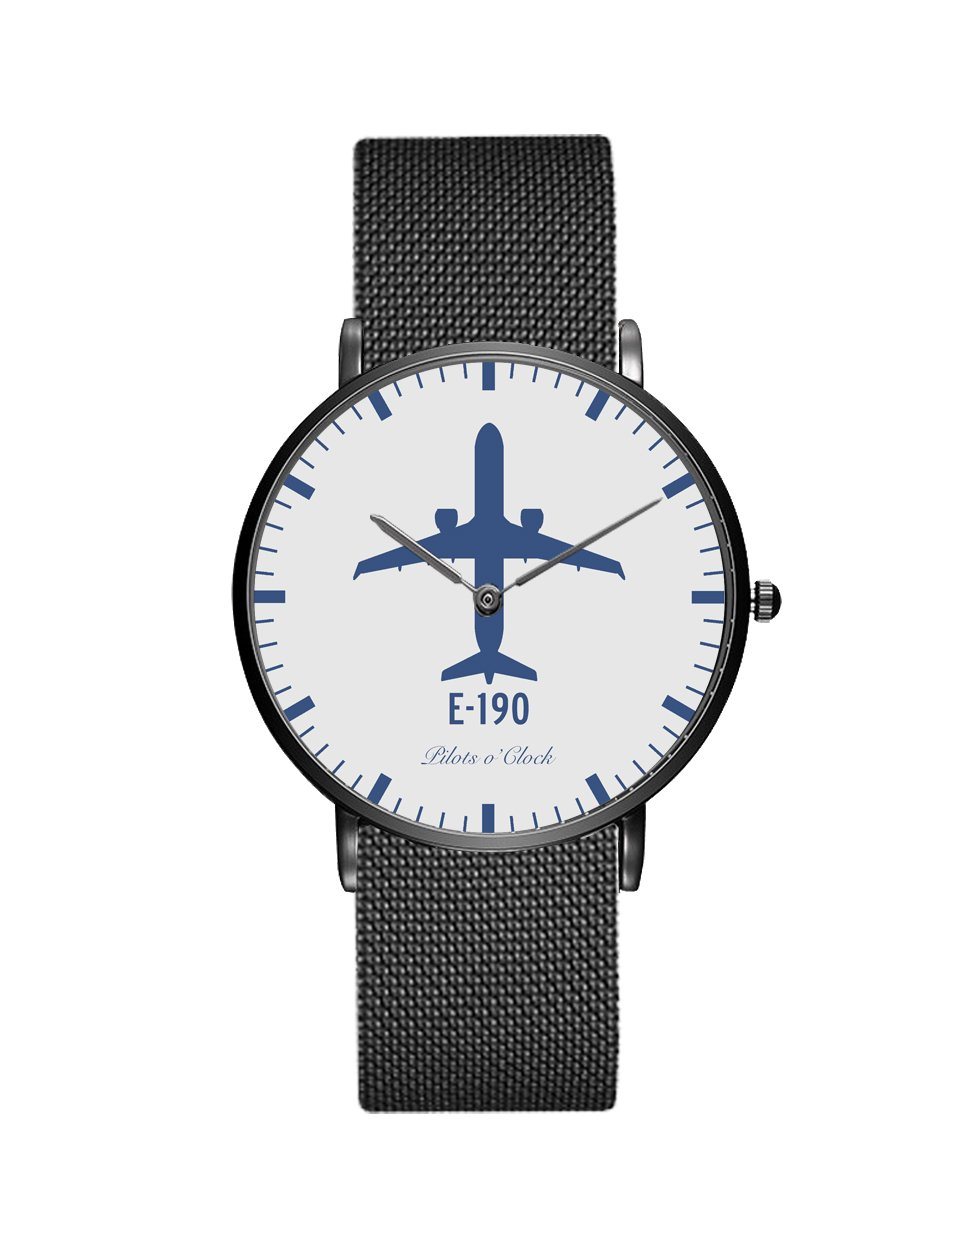 Embraer E190 Stainless Steel Strap Watches Pilot Eyes Store Black & Stainless Steel Strap 